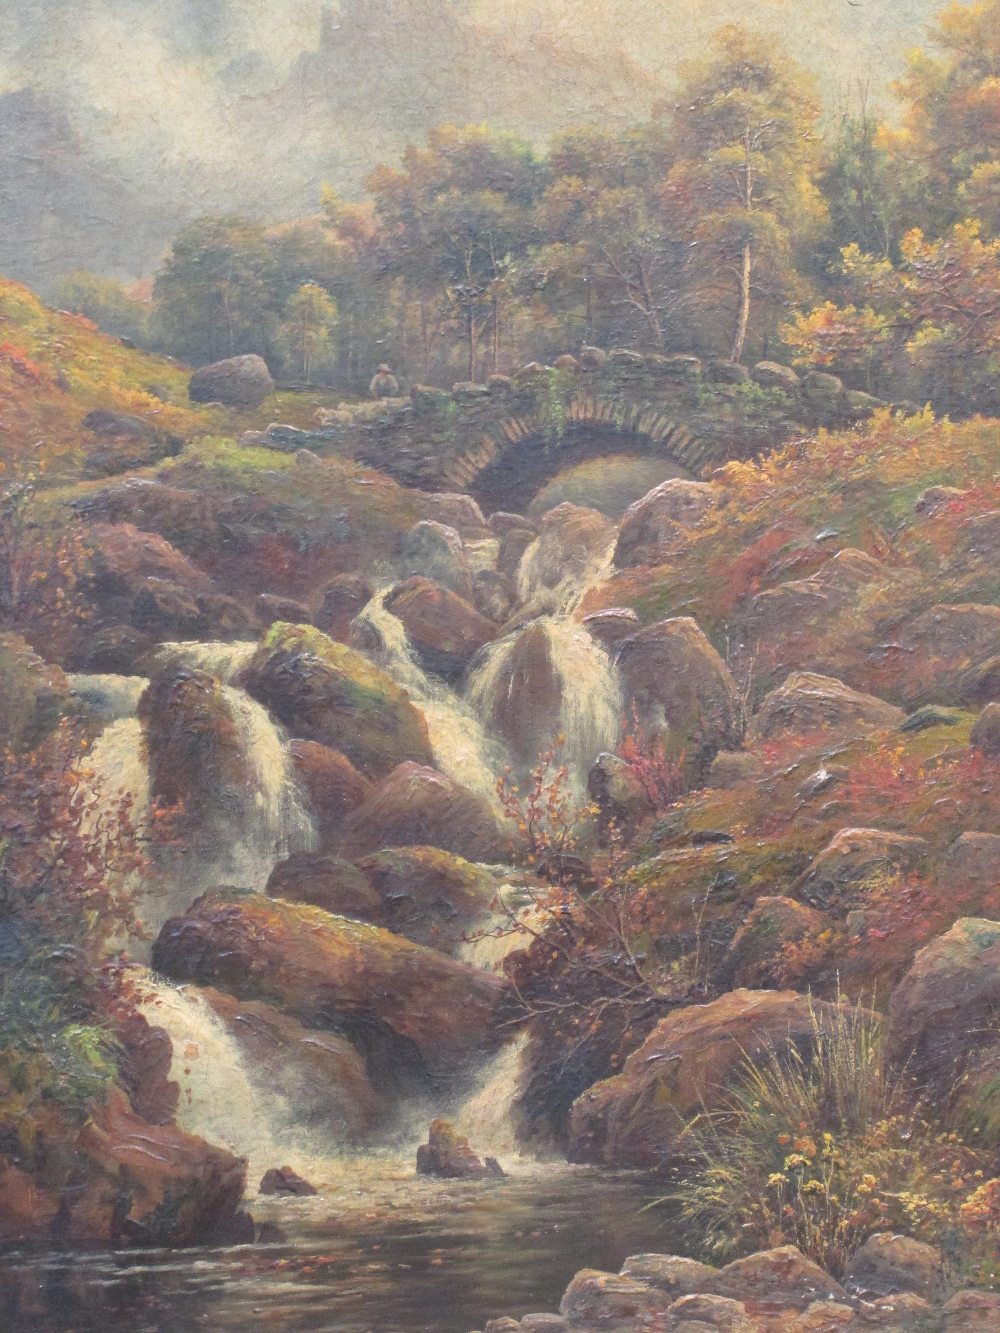 An oil painting, J Barnes, Ashness Bridge, Lake District, signed and dated 1902 and attributed en